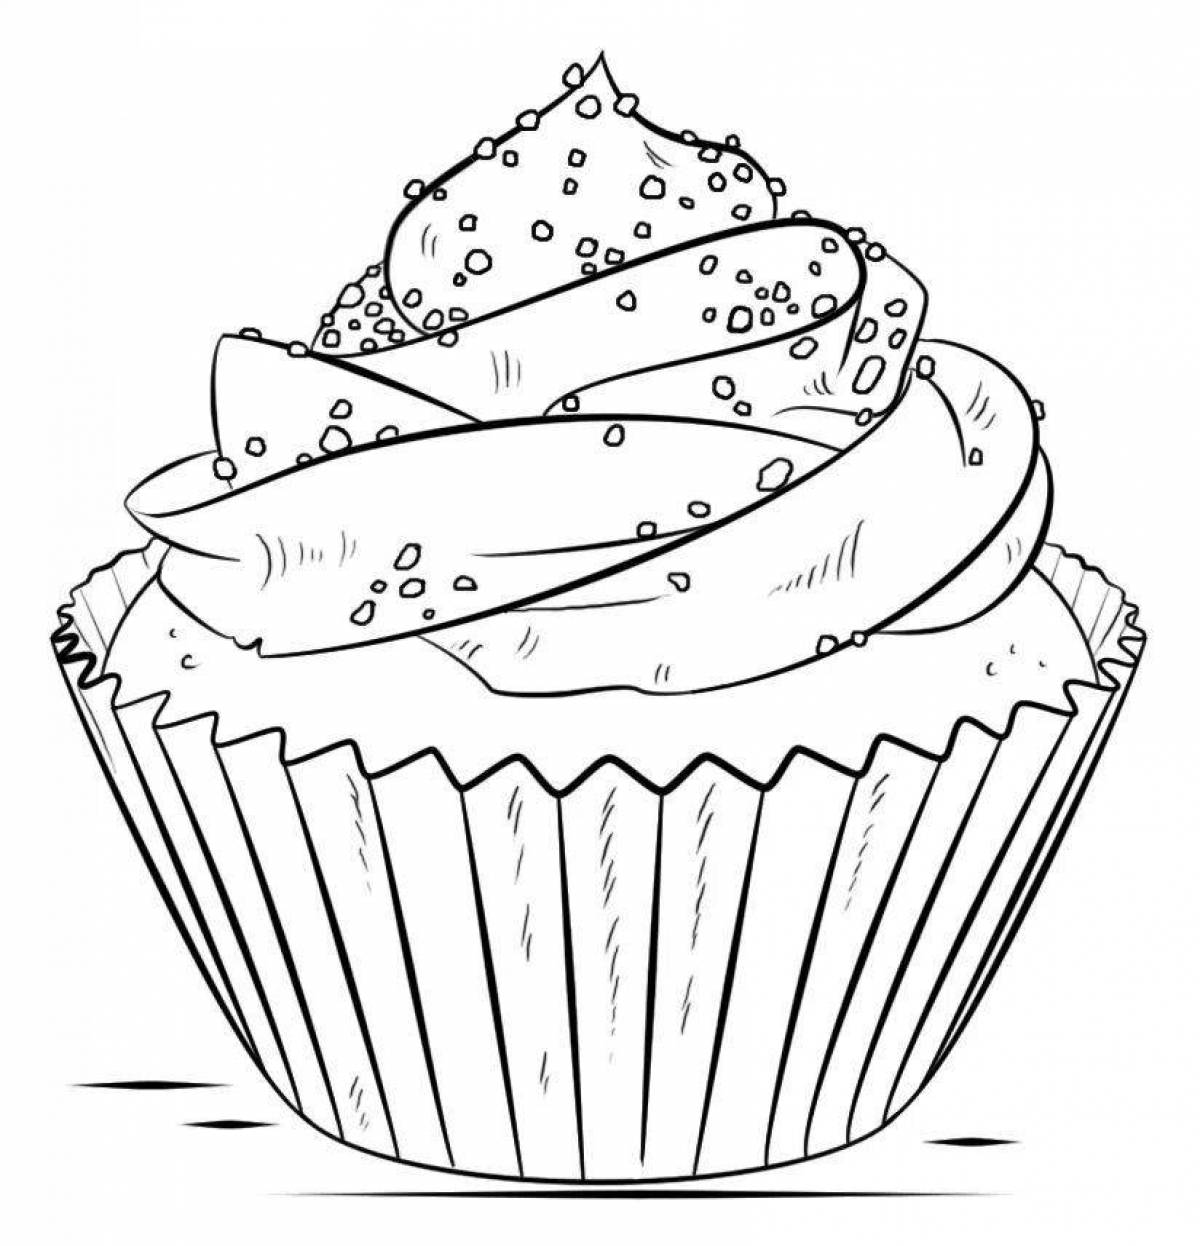 Sweet smelling cake coloring book